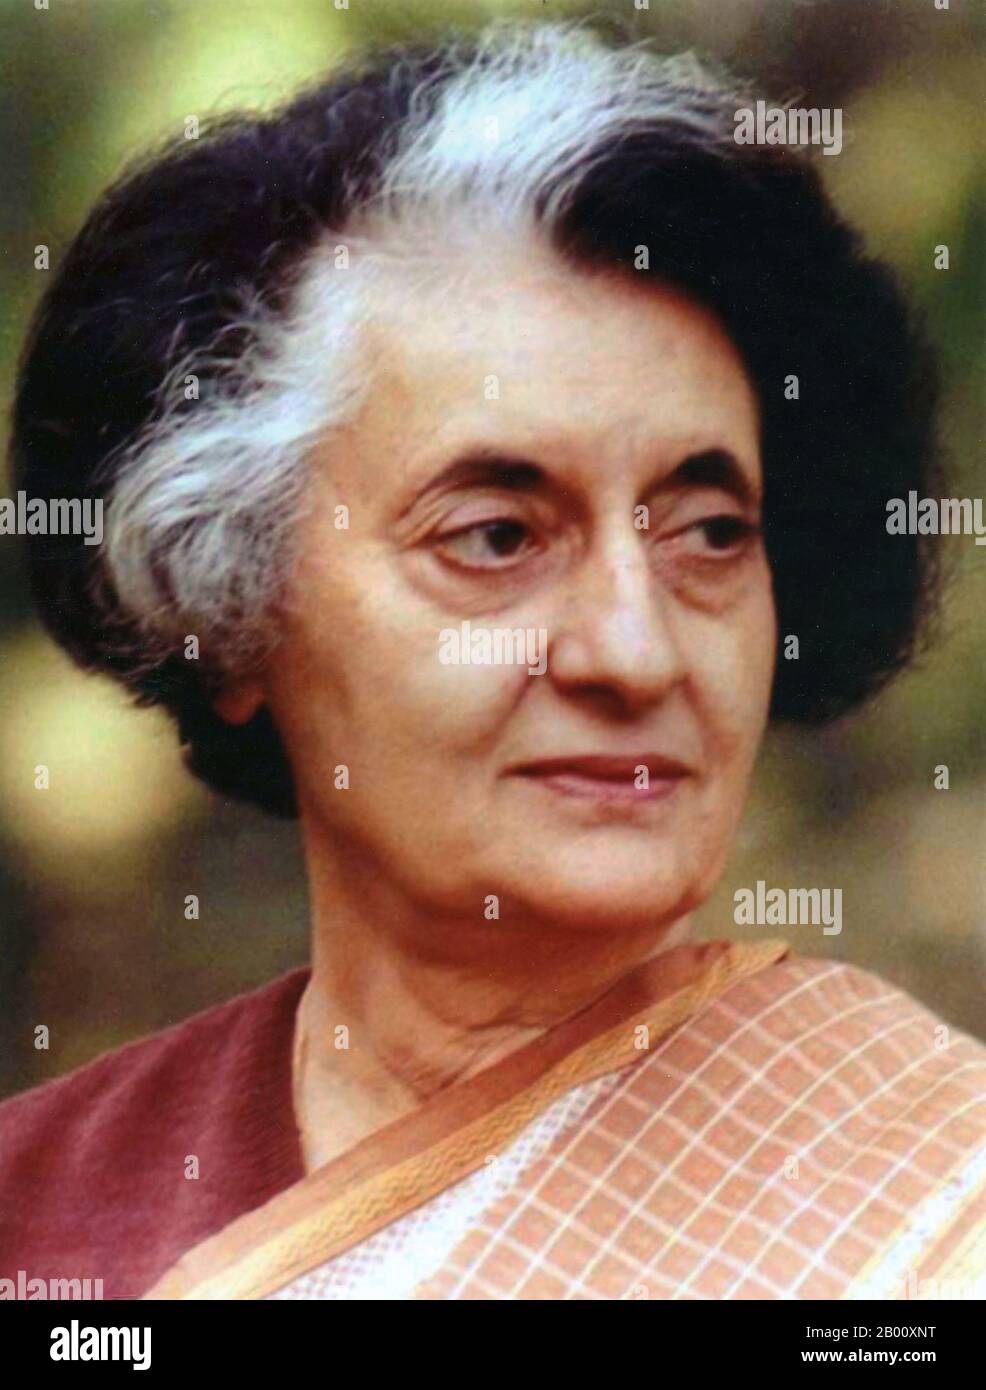 India: Indira Gandhi (1917-1984), Prime Minister of India for four consecutive terms, 1966-1984.  Indira Priyadarshini Gandhi (19 November 1917 – 31 October 1984) was the Prime Minister of the Republic of India for three consecutive terms from 1966 to 1977 and for a fourth term from 1980 until her assassination in 1984, a total of fifteen years. She is India's only female prime minister to date. She is the world's all time longest serving female Prime Minister. Stock Photo